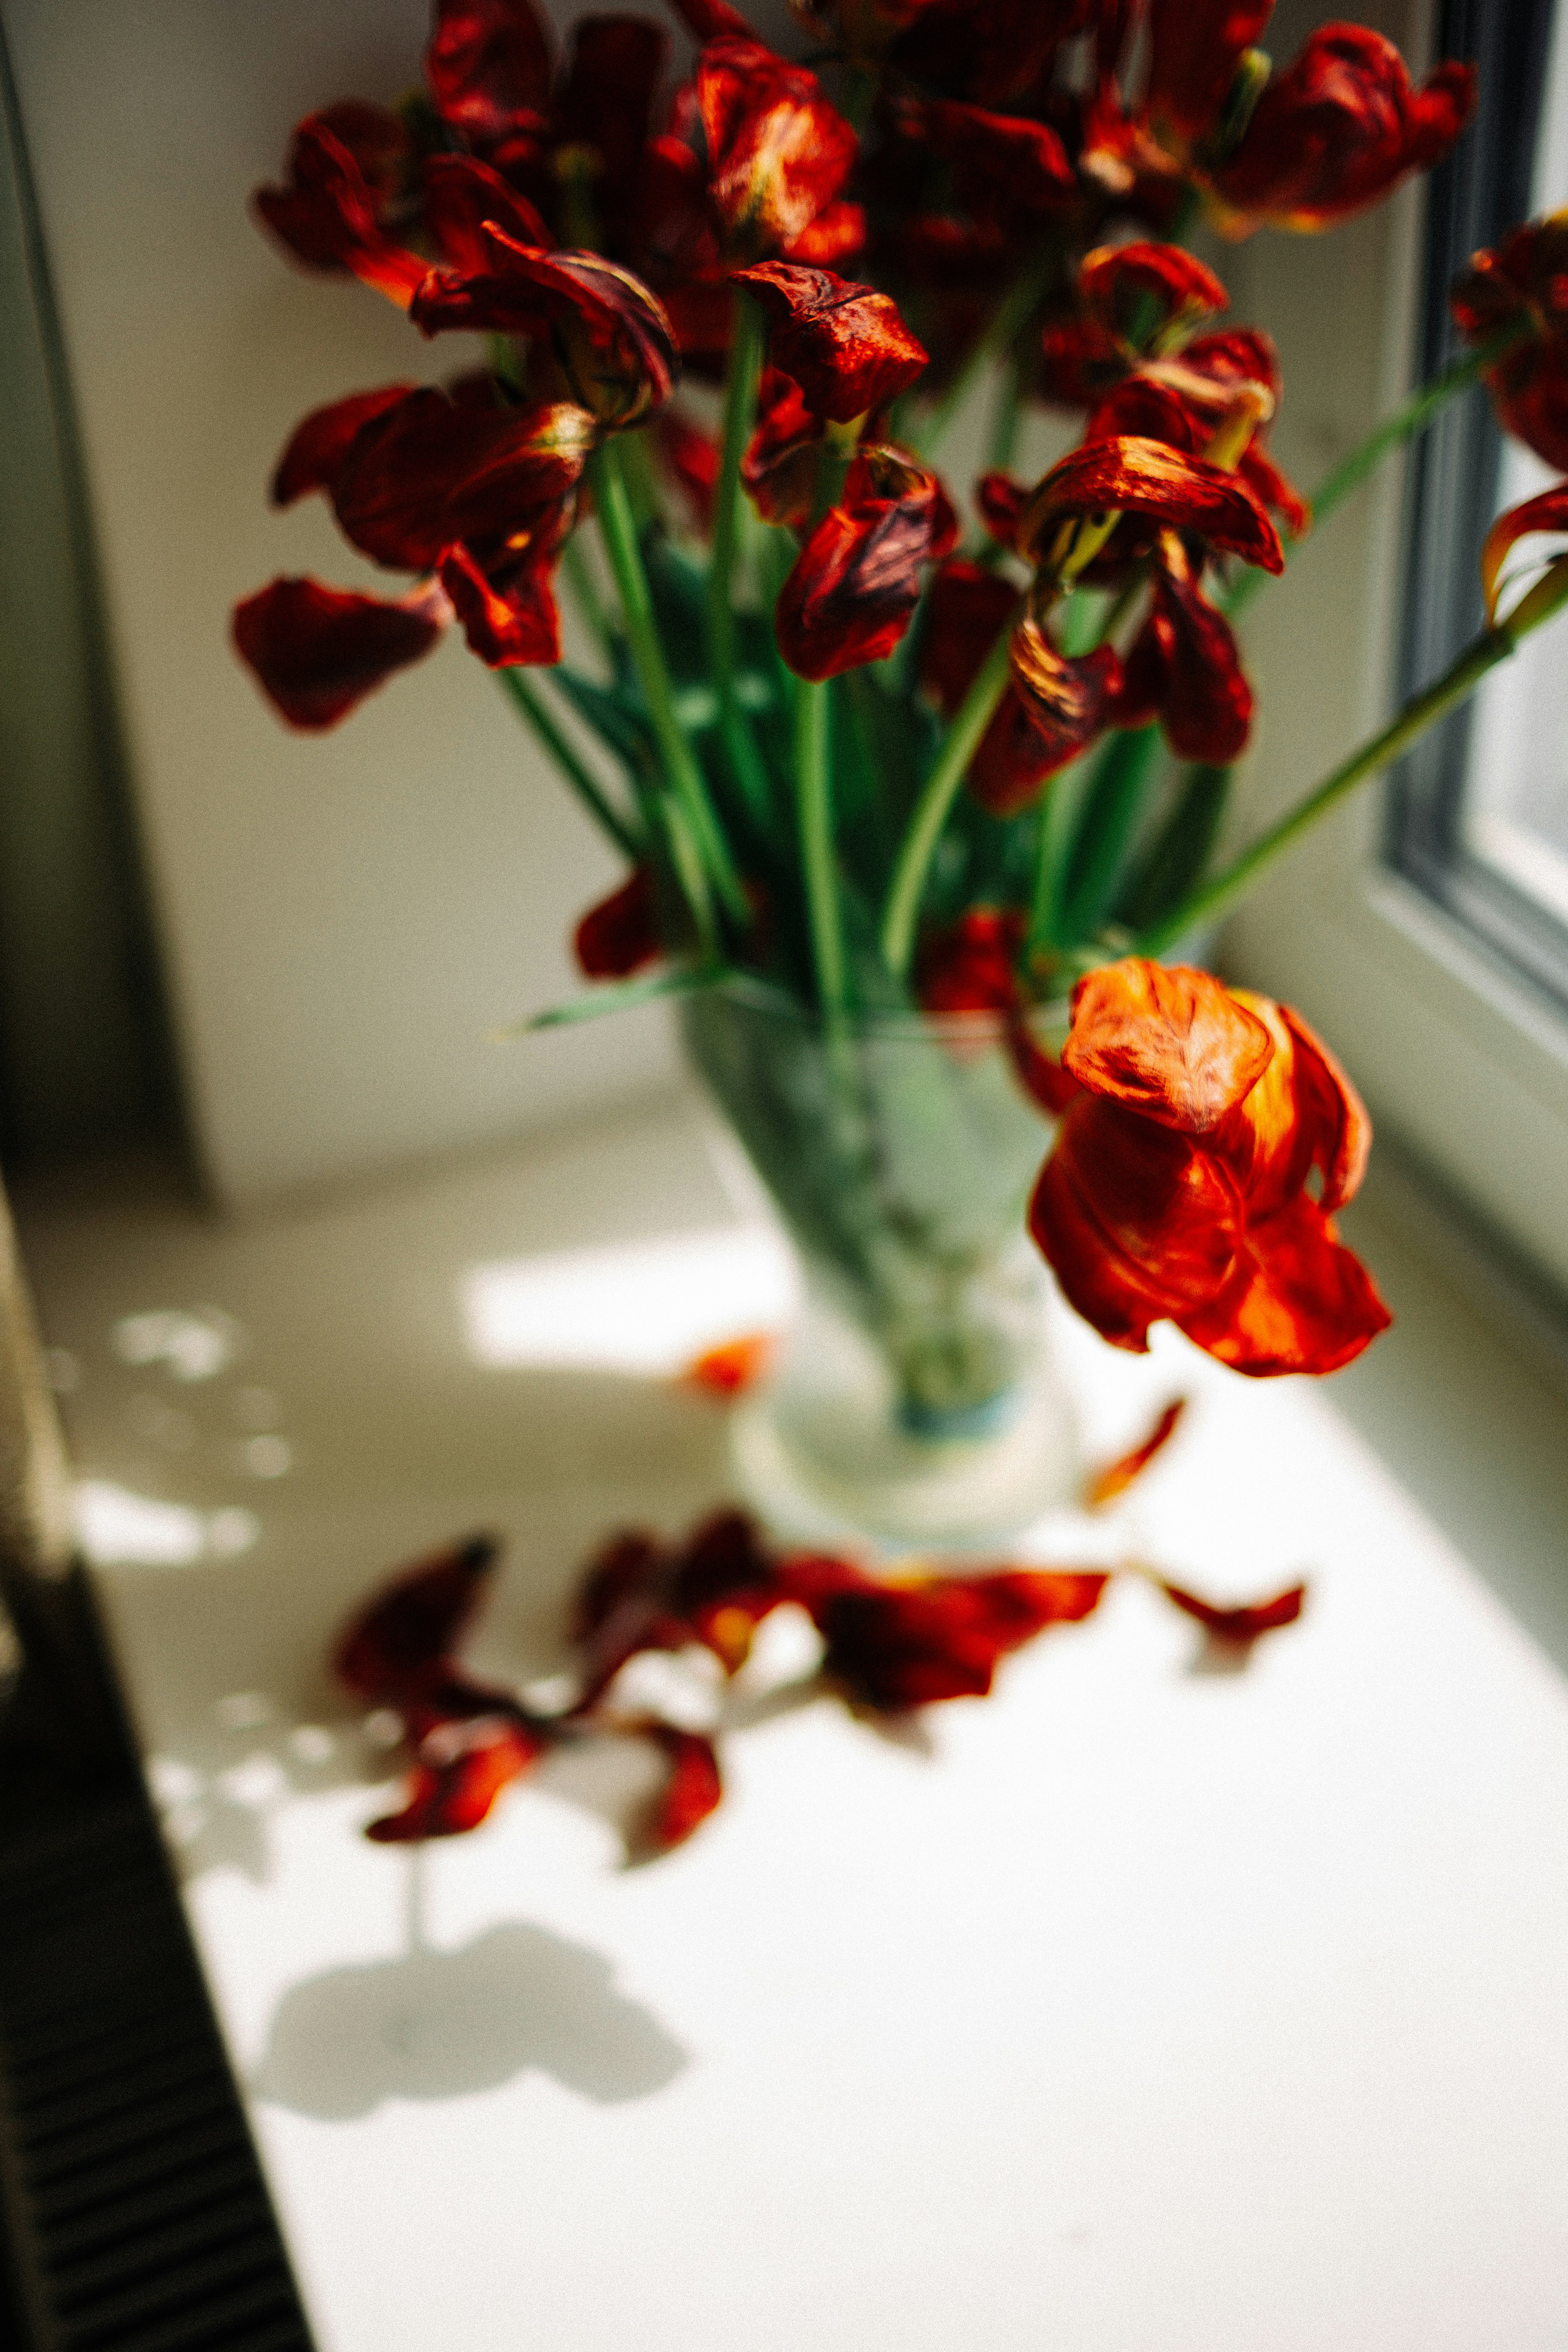 Choose from a curated selection of flower photos. Always free on Unsplash.